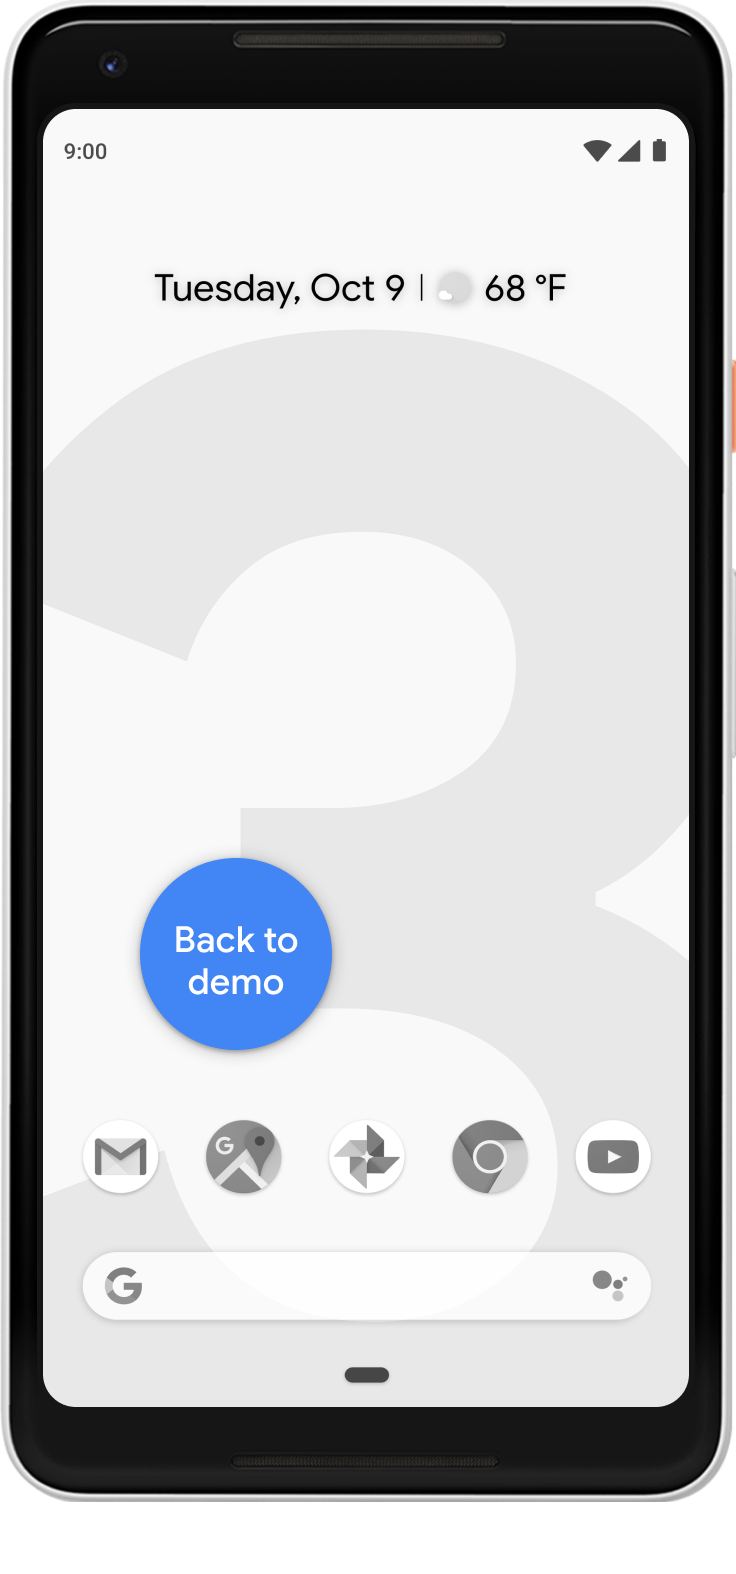 Homescreen with a prominent 'Back to demo' button